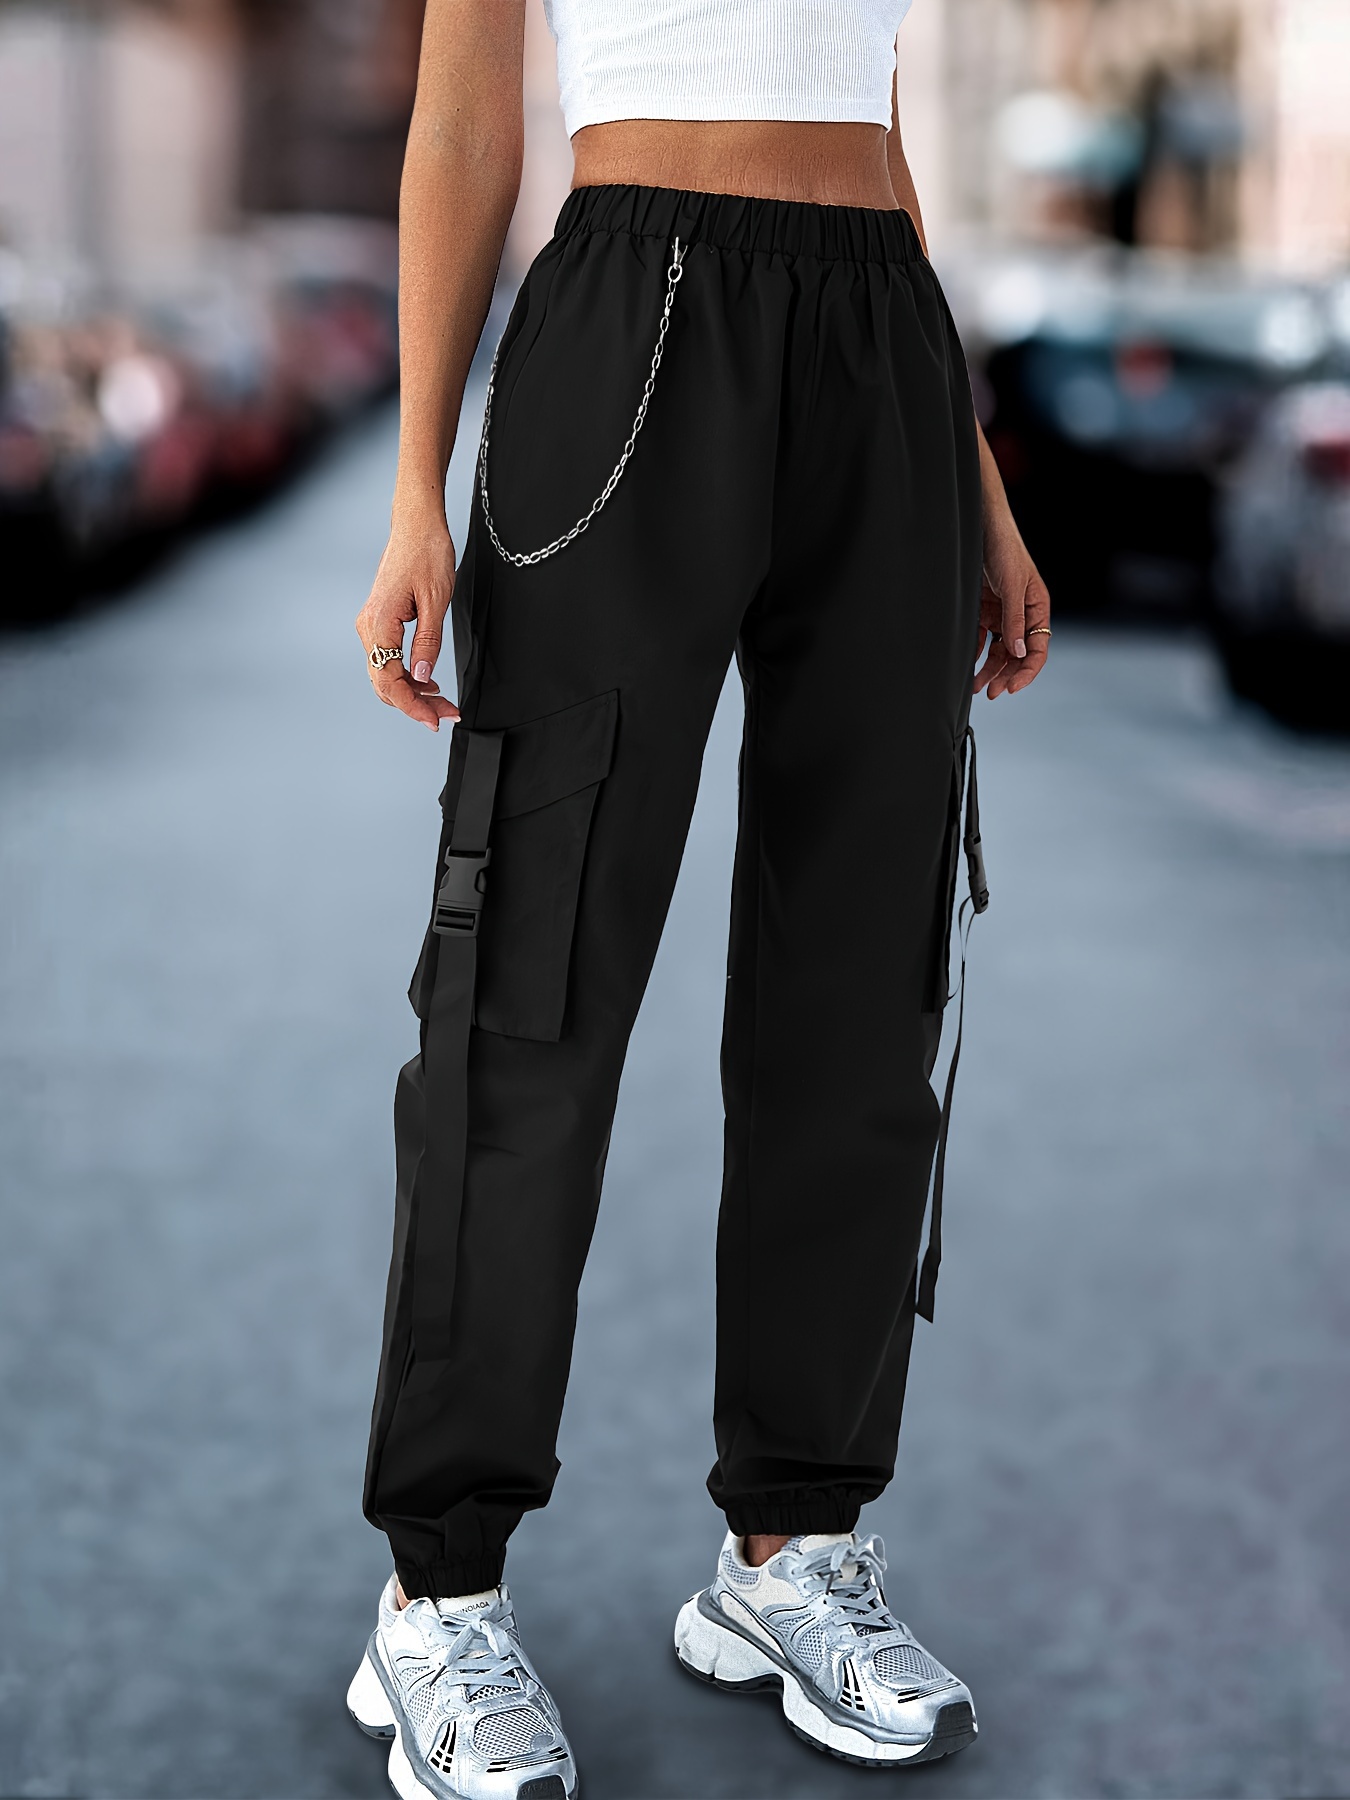 Breathable Cargo Pants With Chain For Women With Stylish Chain